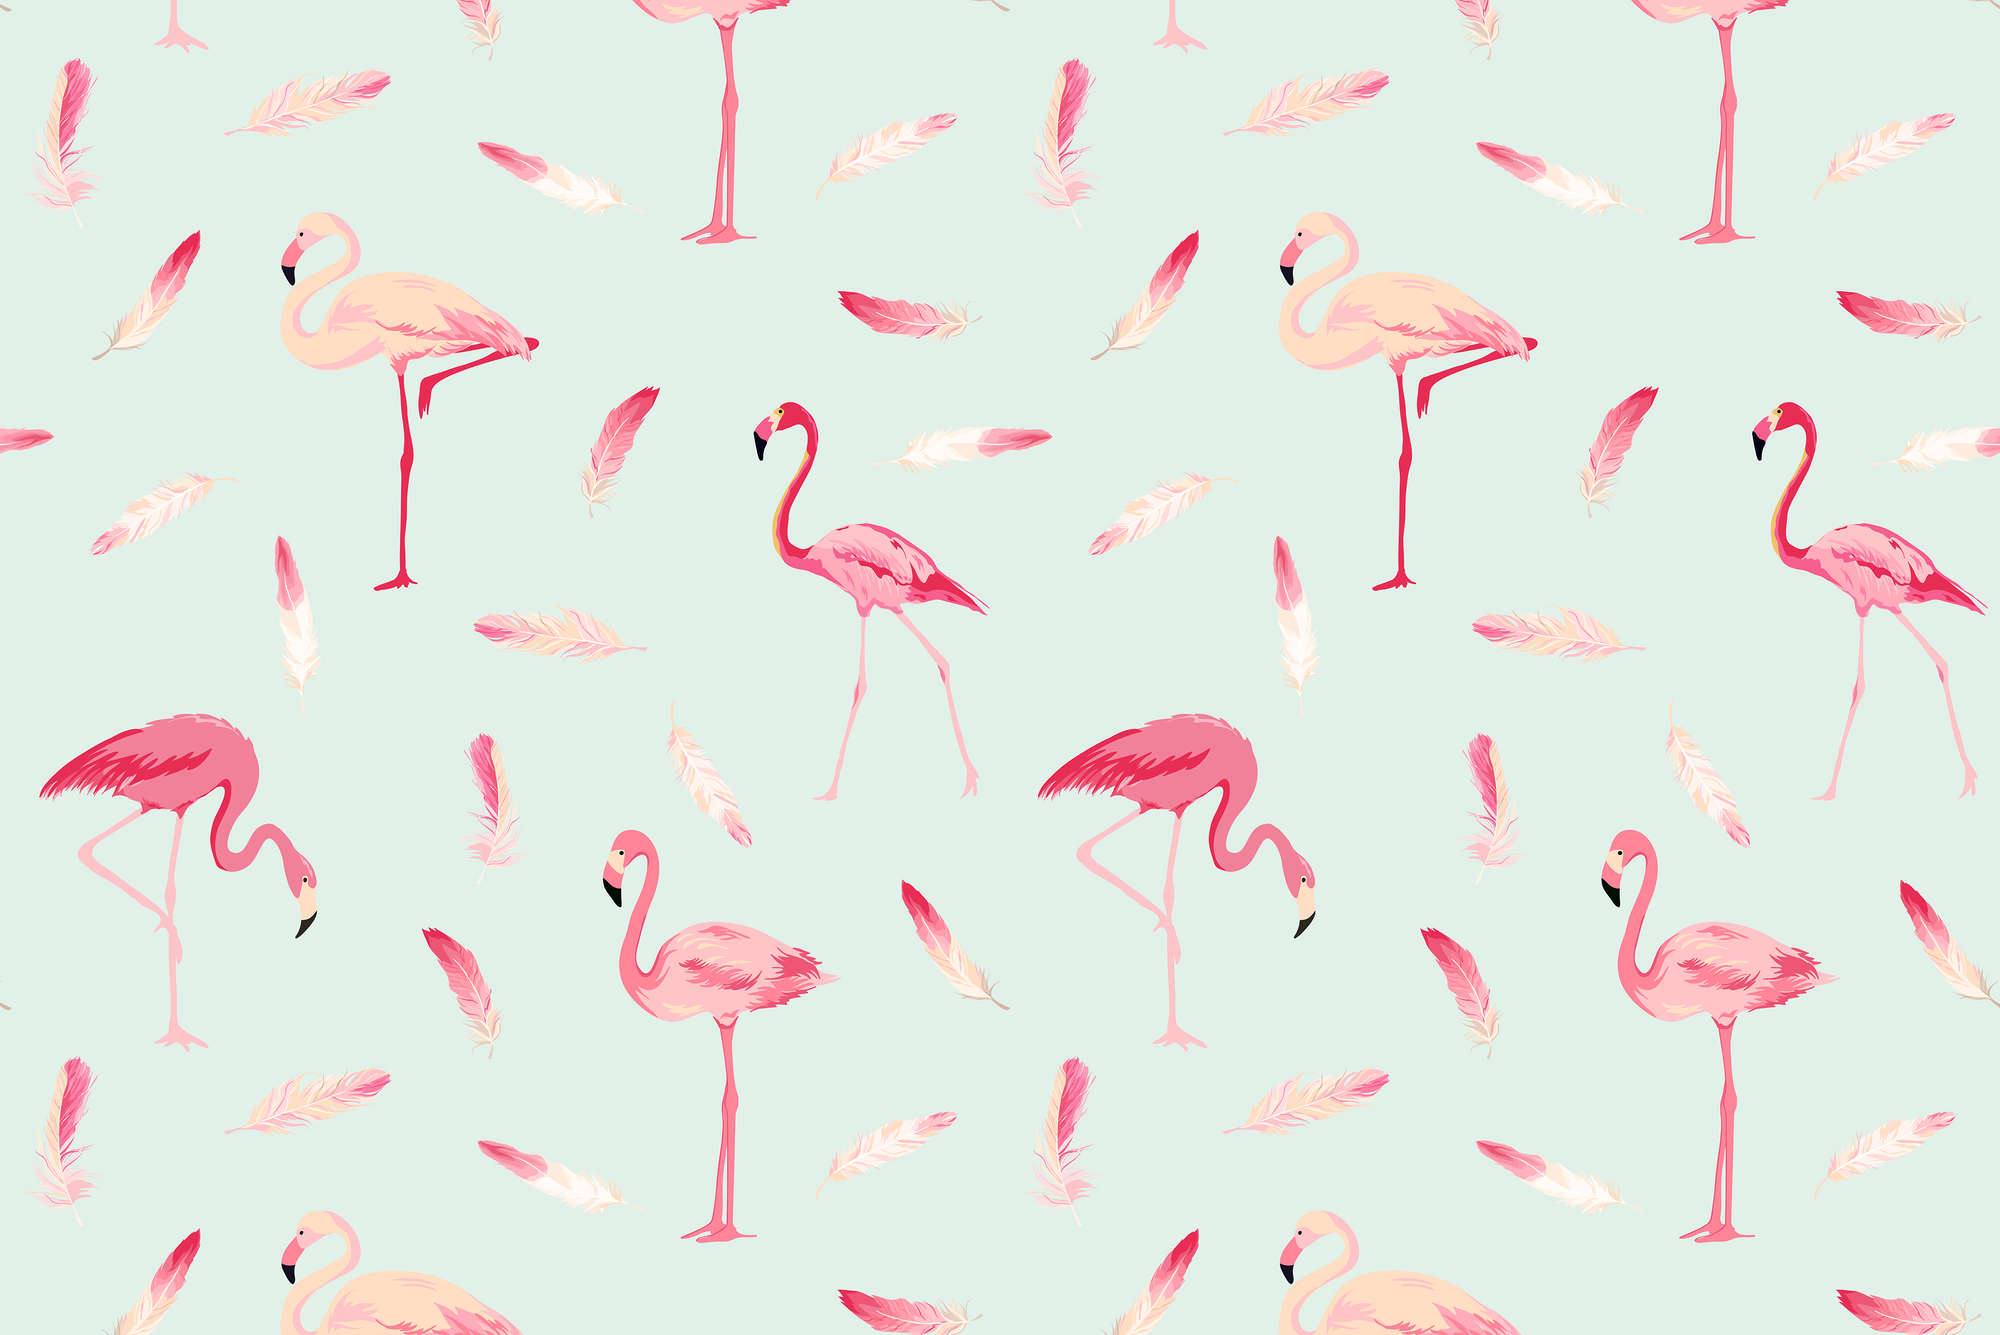             Graphic mural flamingos and feathers on premium smooth vinyl
        